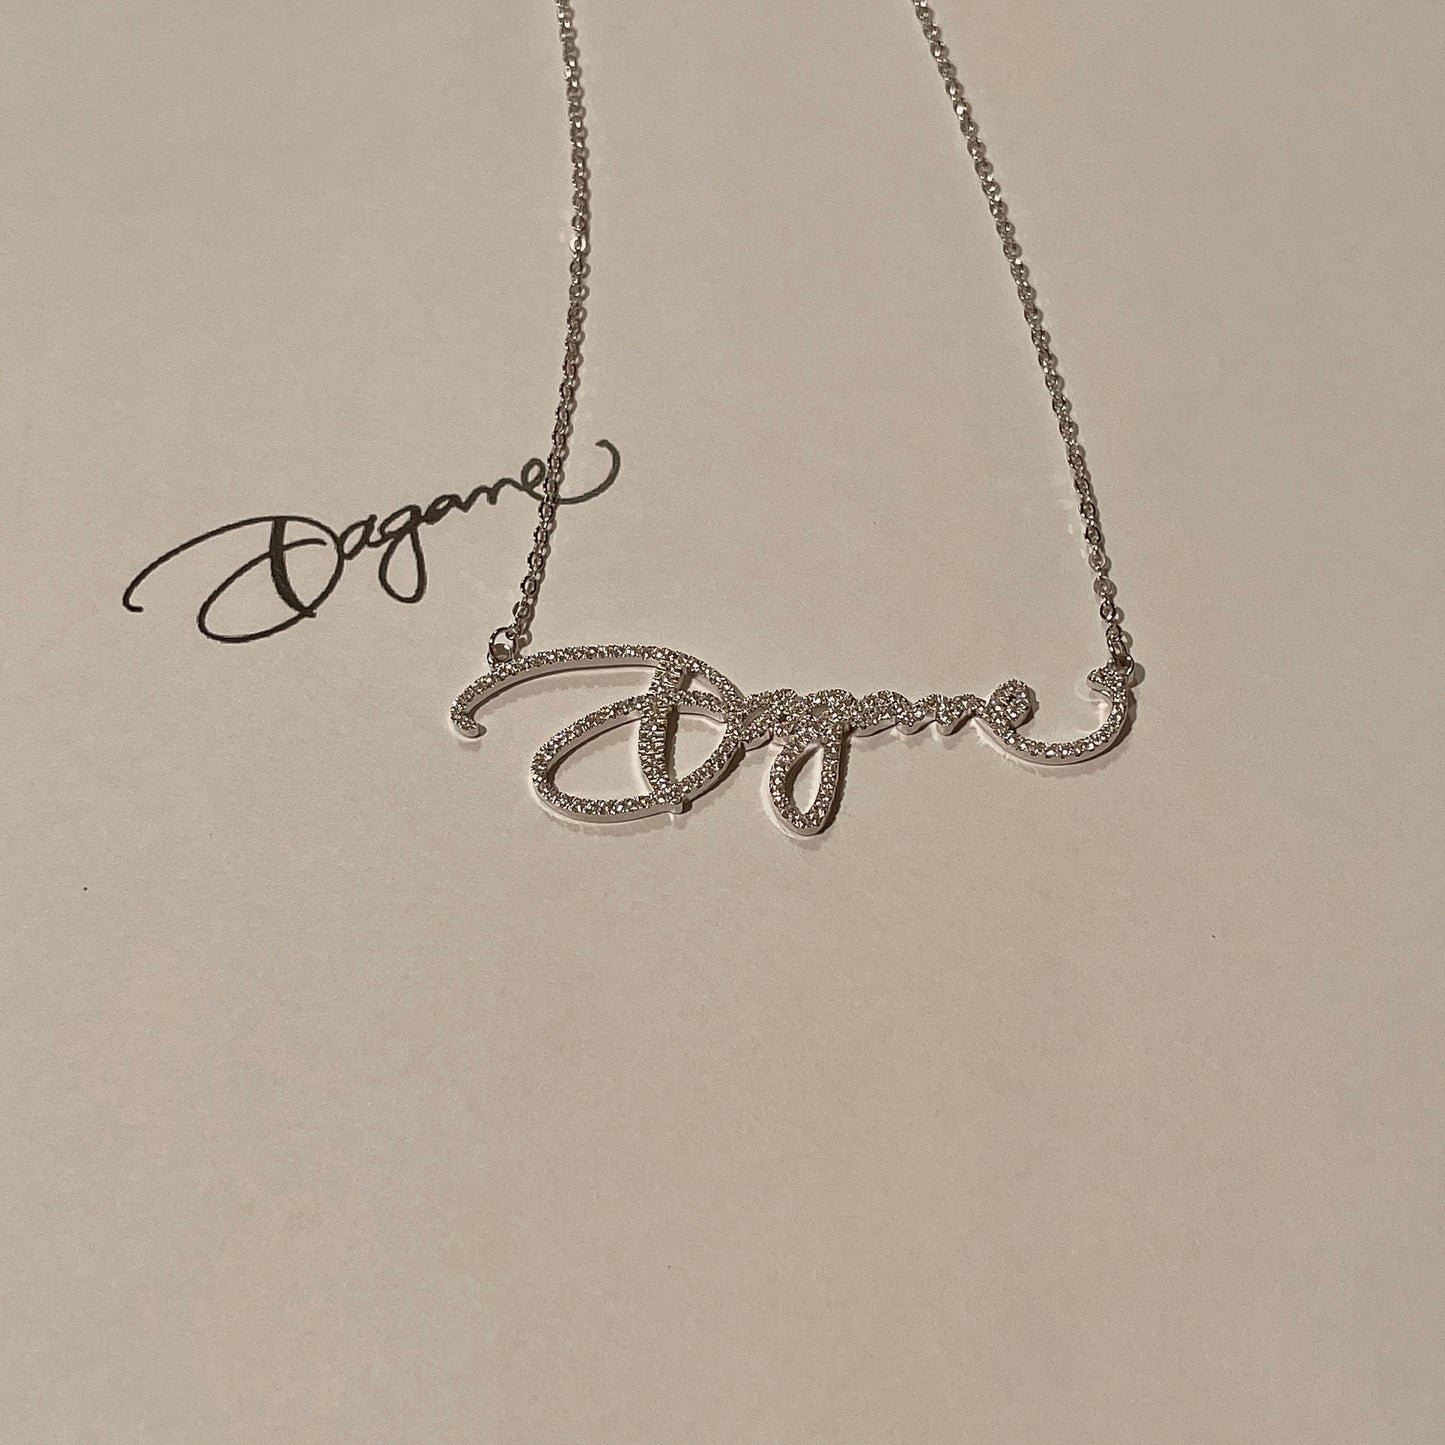 Silver 925 and CZ handwriting necklace